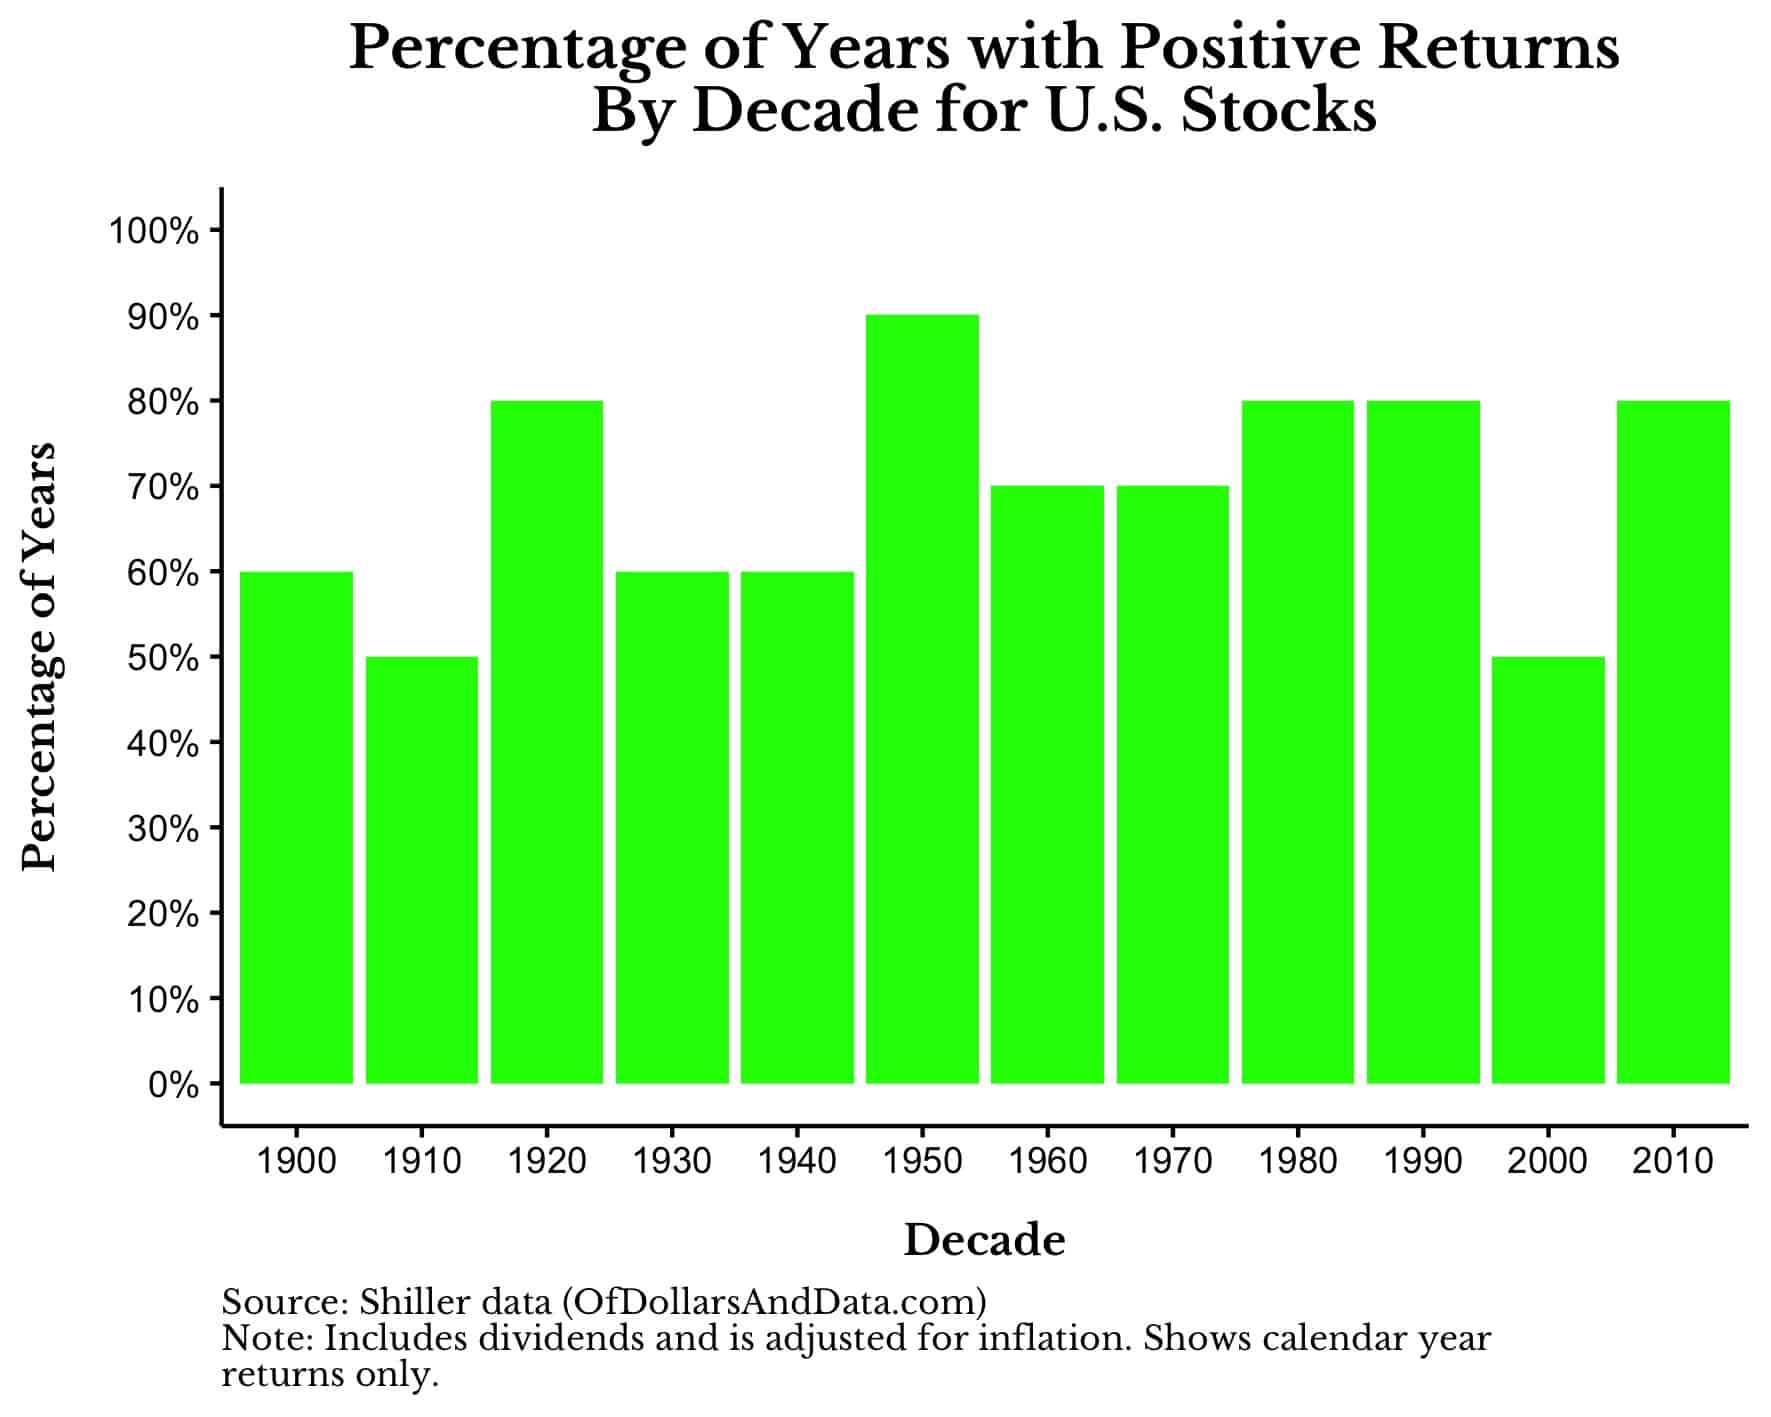 Percentage of years with positive returns by decade for US stocks